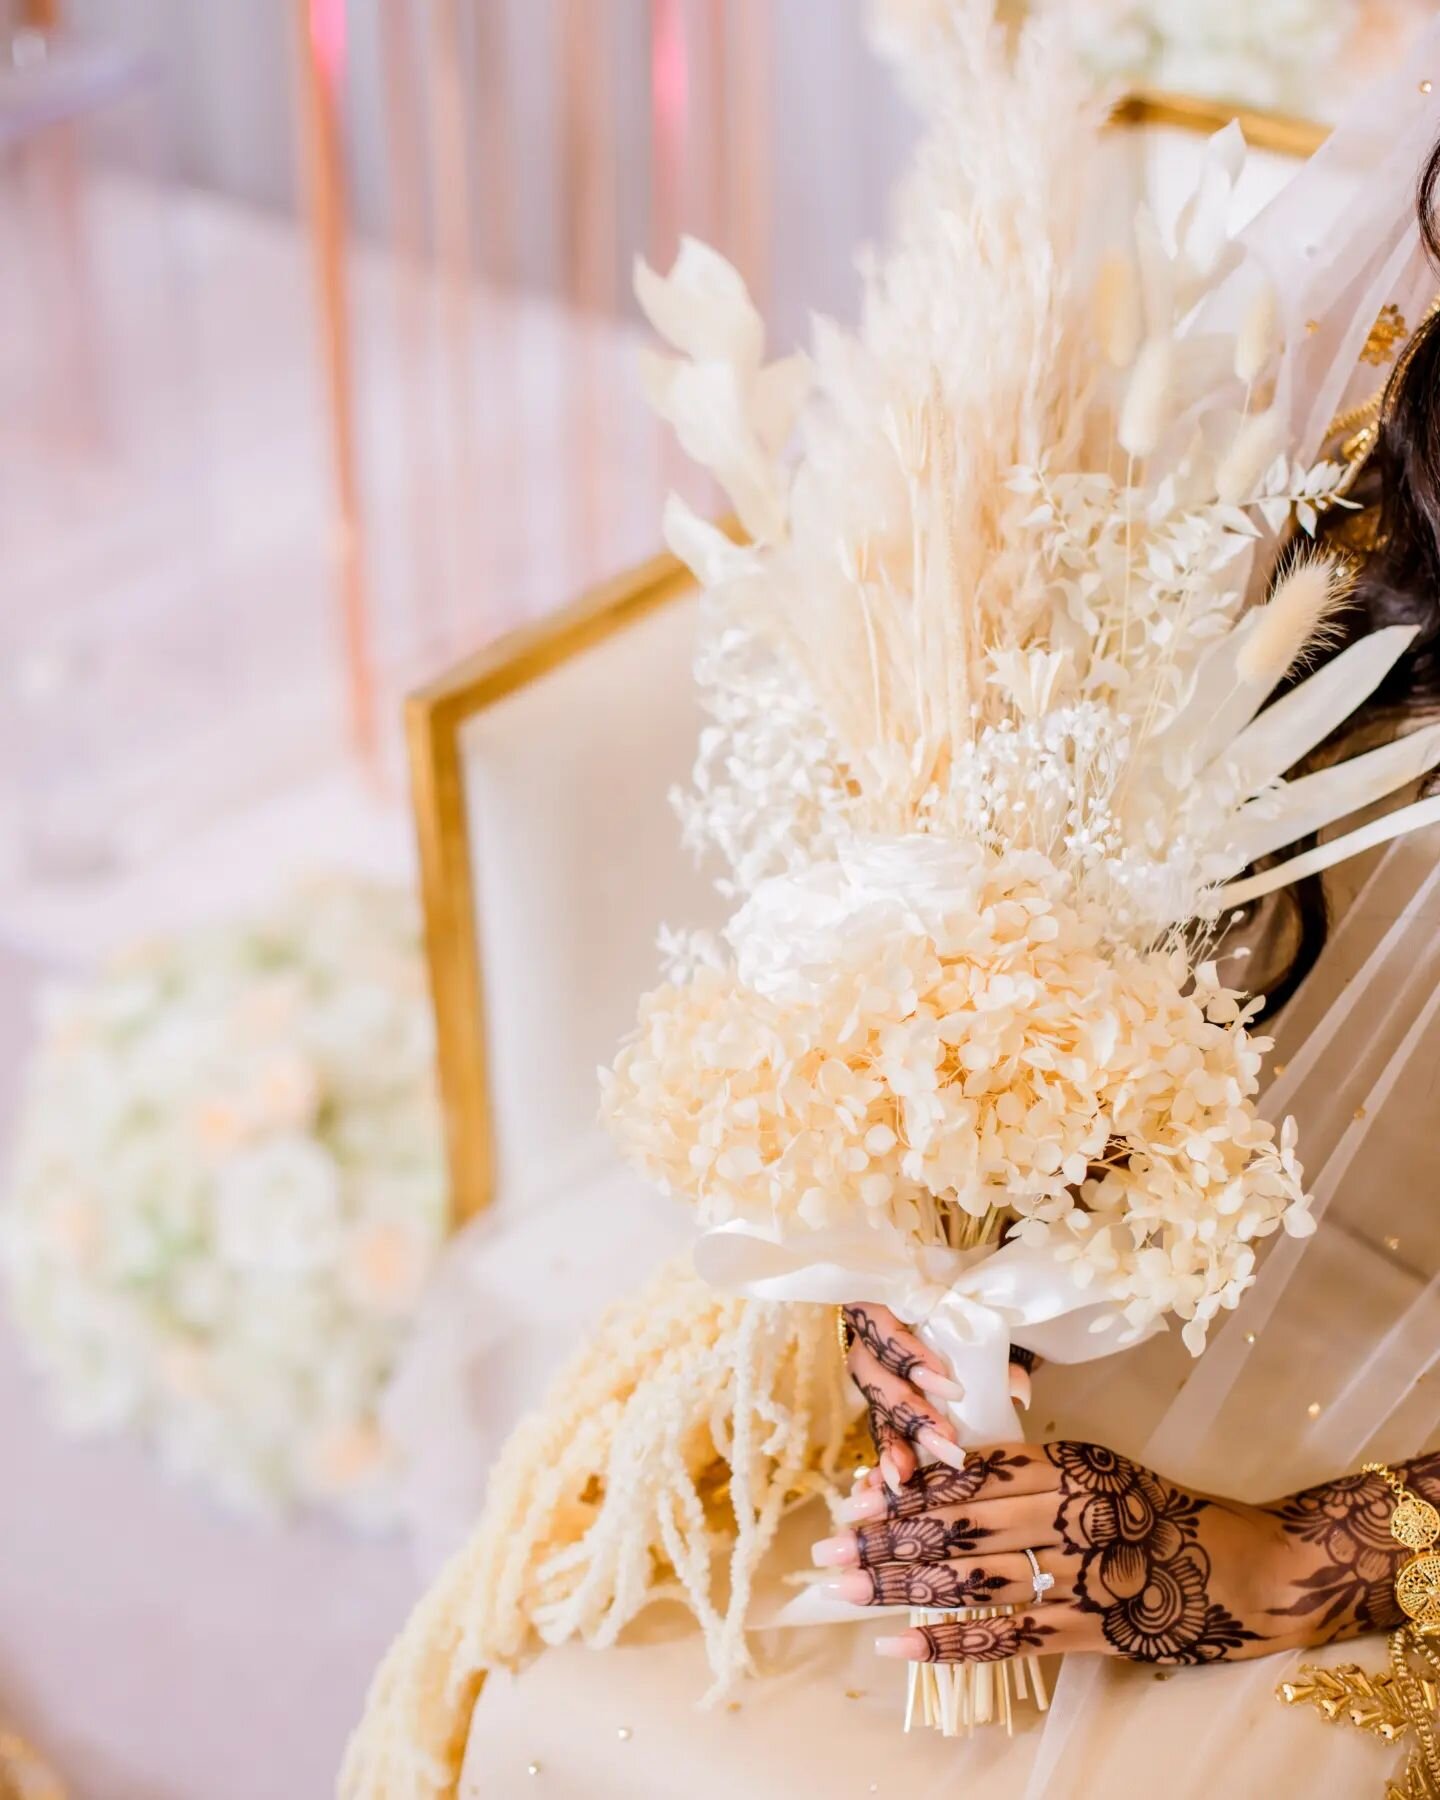 The Bouquet! I have been seeing some of the most creative bouquet designs lately! I loved this one at this wedding of I &amp;  I! So many layers and textures made for the prettiest accessory to the wedding look ( that included an elegant Gold diraac 